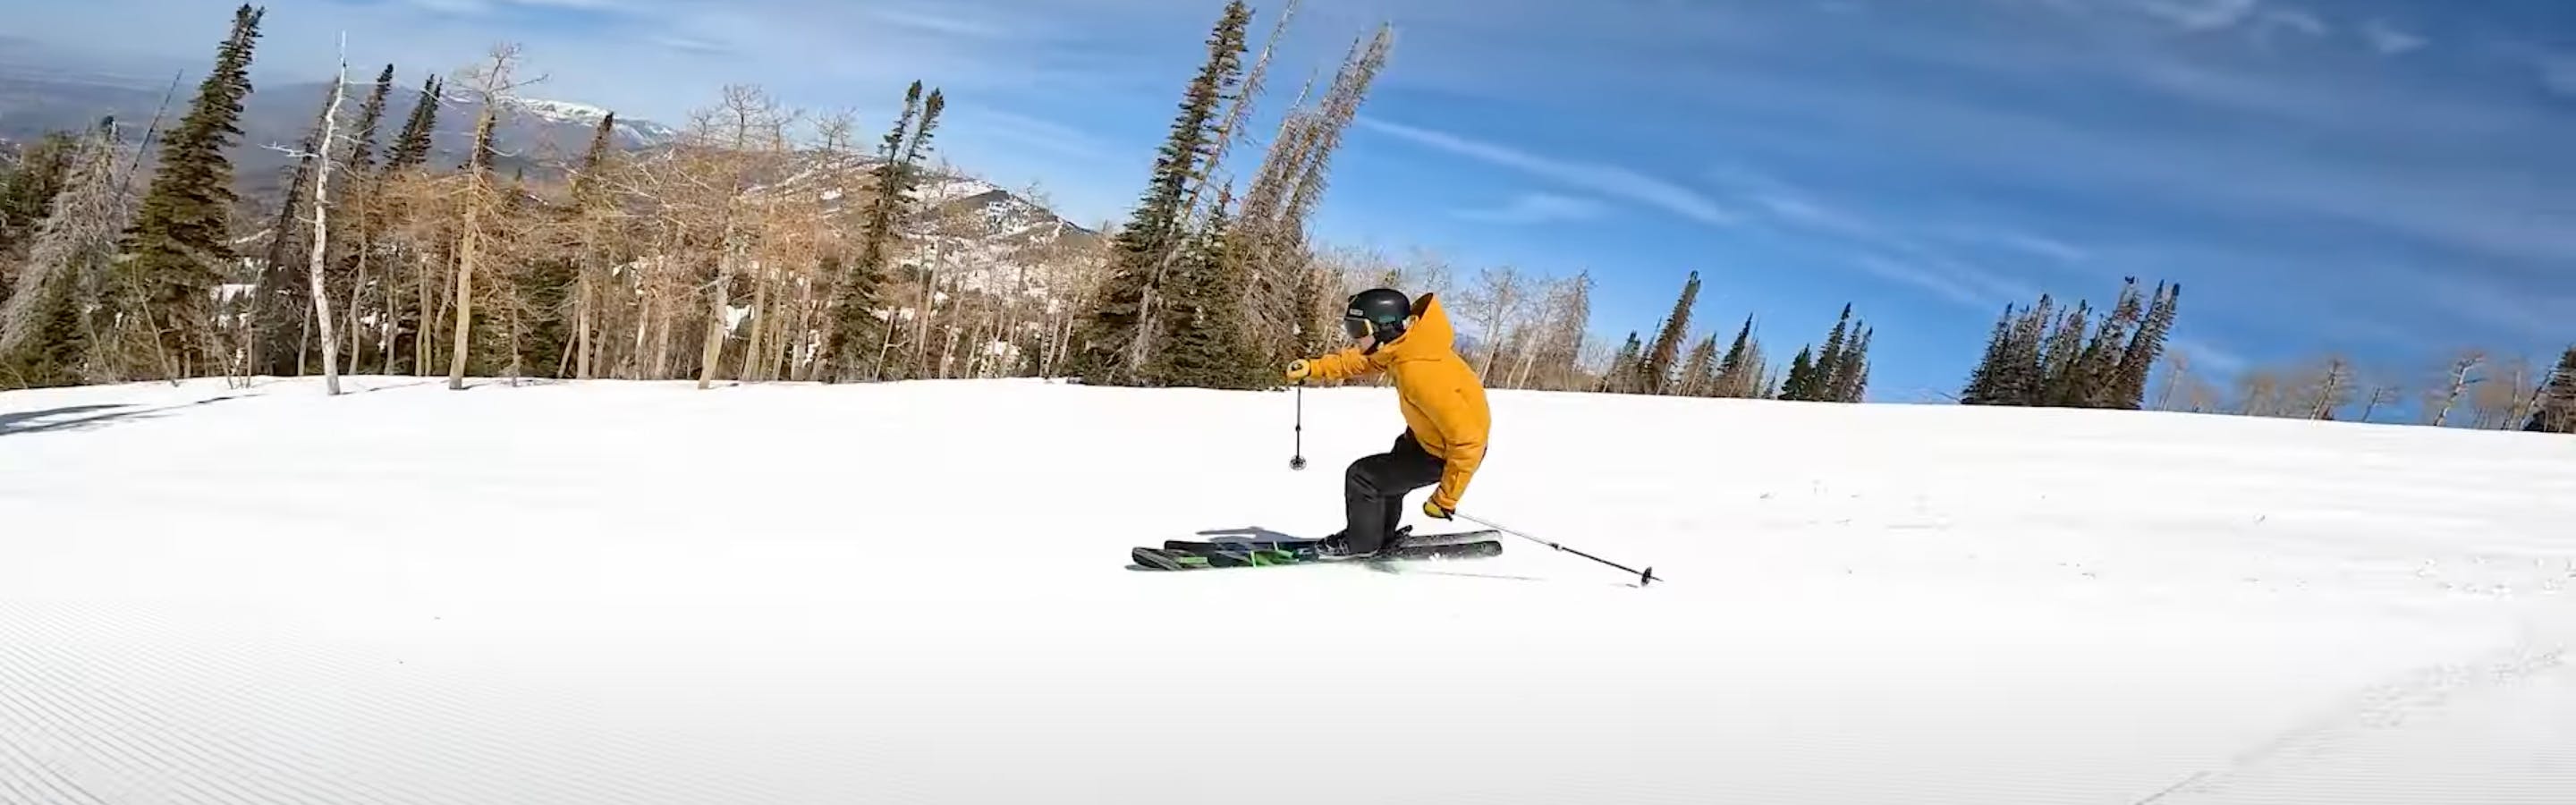 A skier carving down the mountain. 